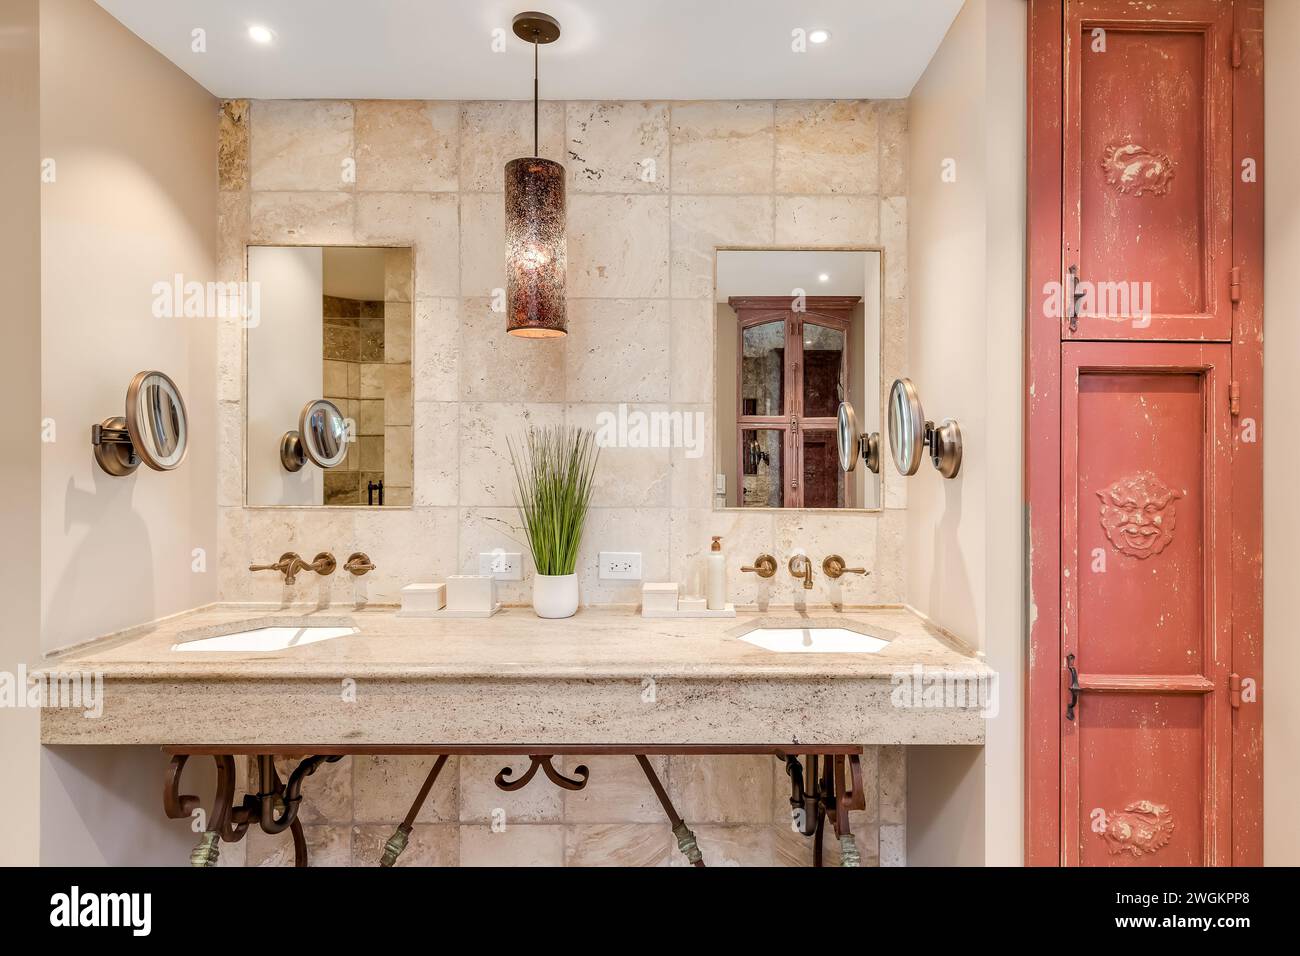 A Spanish style bathroom with brown stone tile walls, a light hanging over a granite countertop with gold mounted faucets, and a red rustic cabinet. Stock Photo